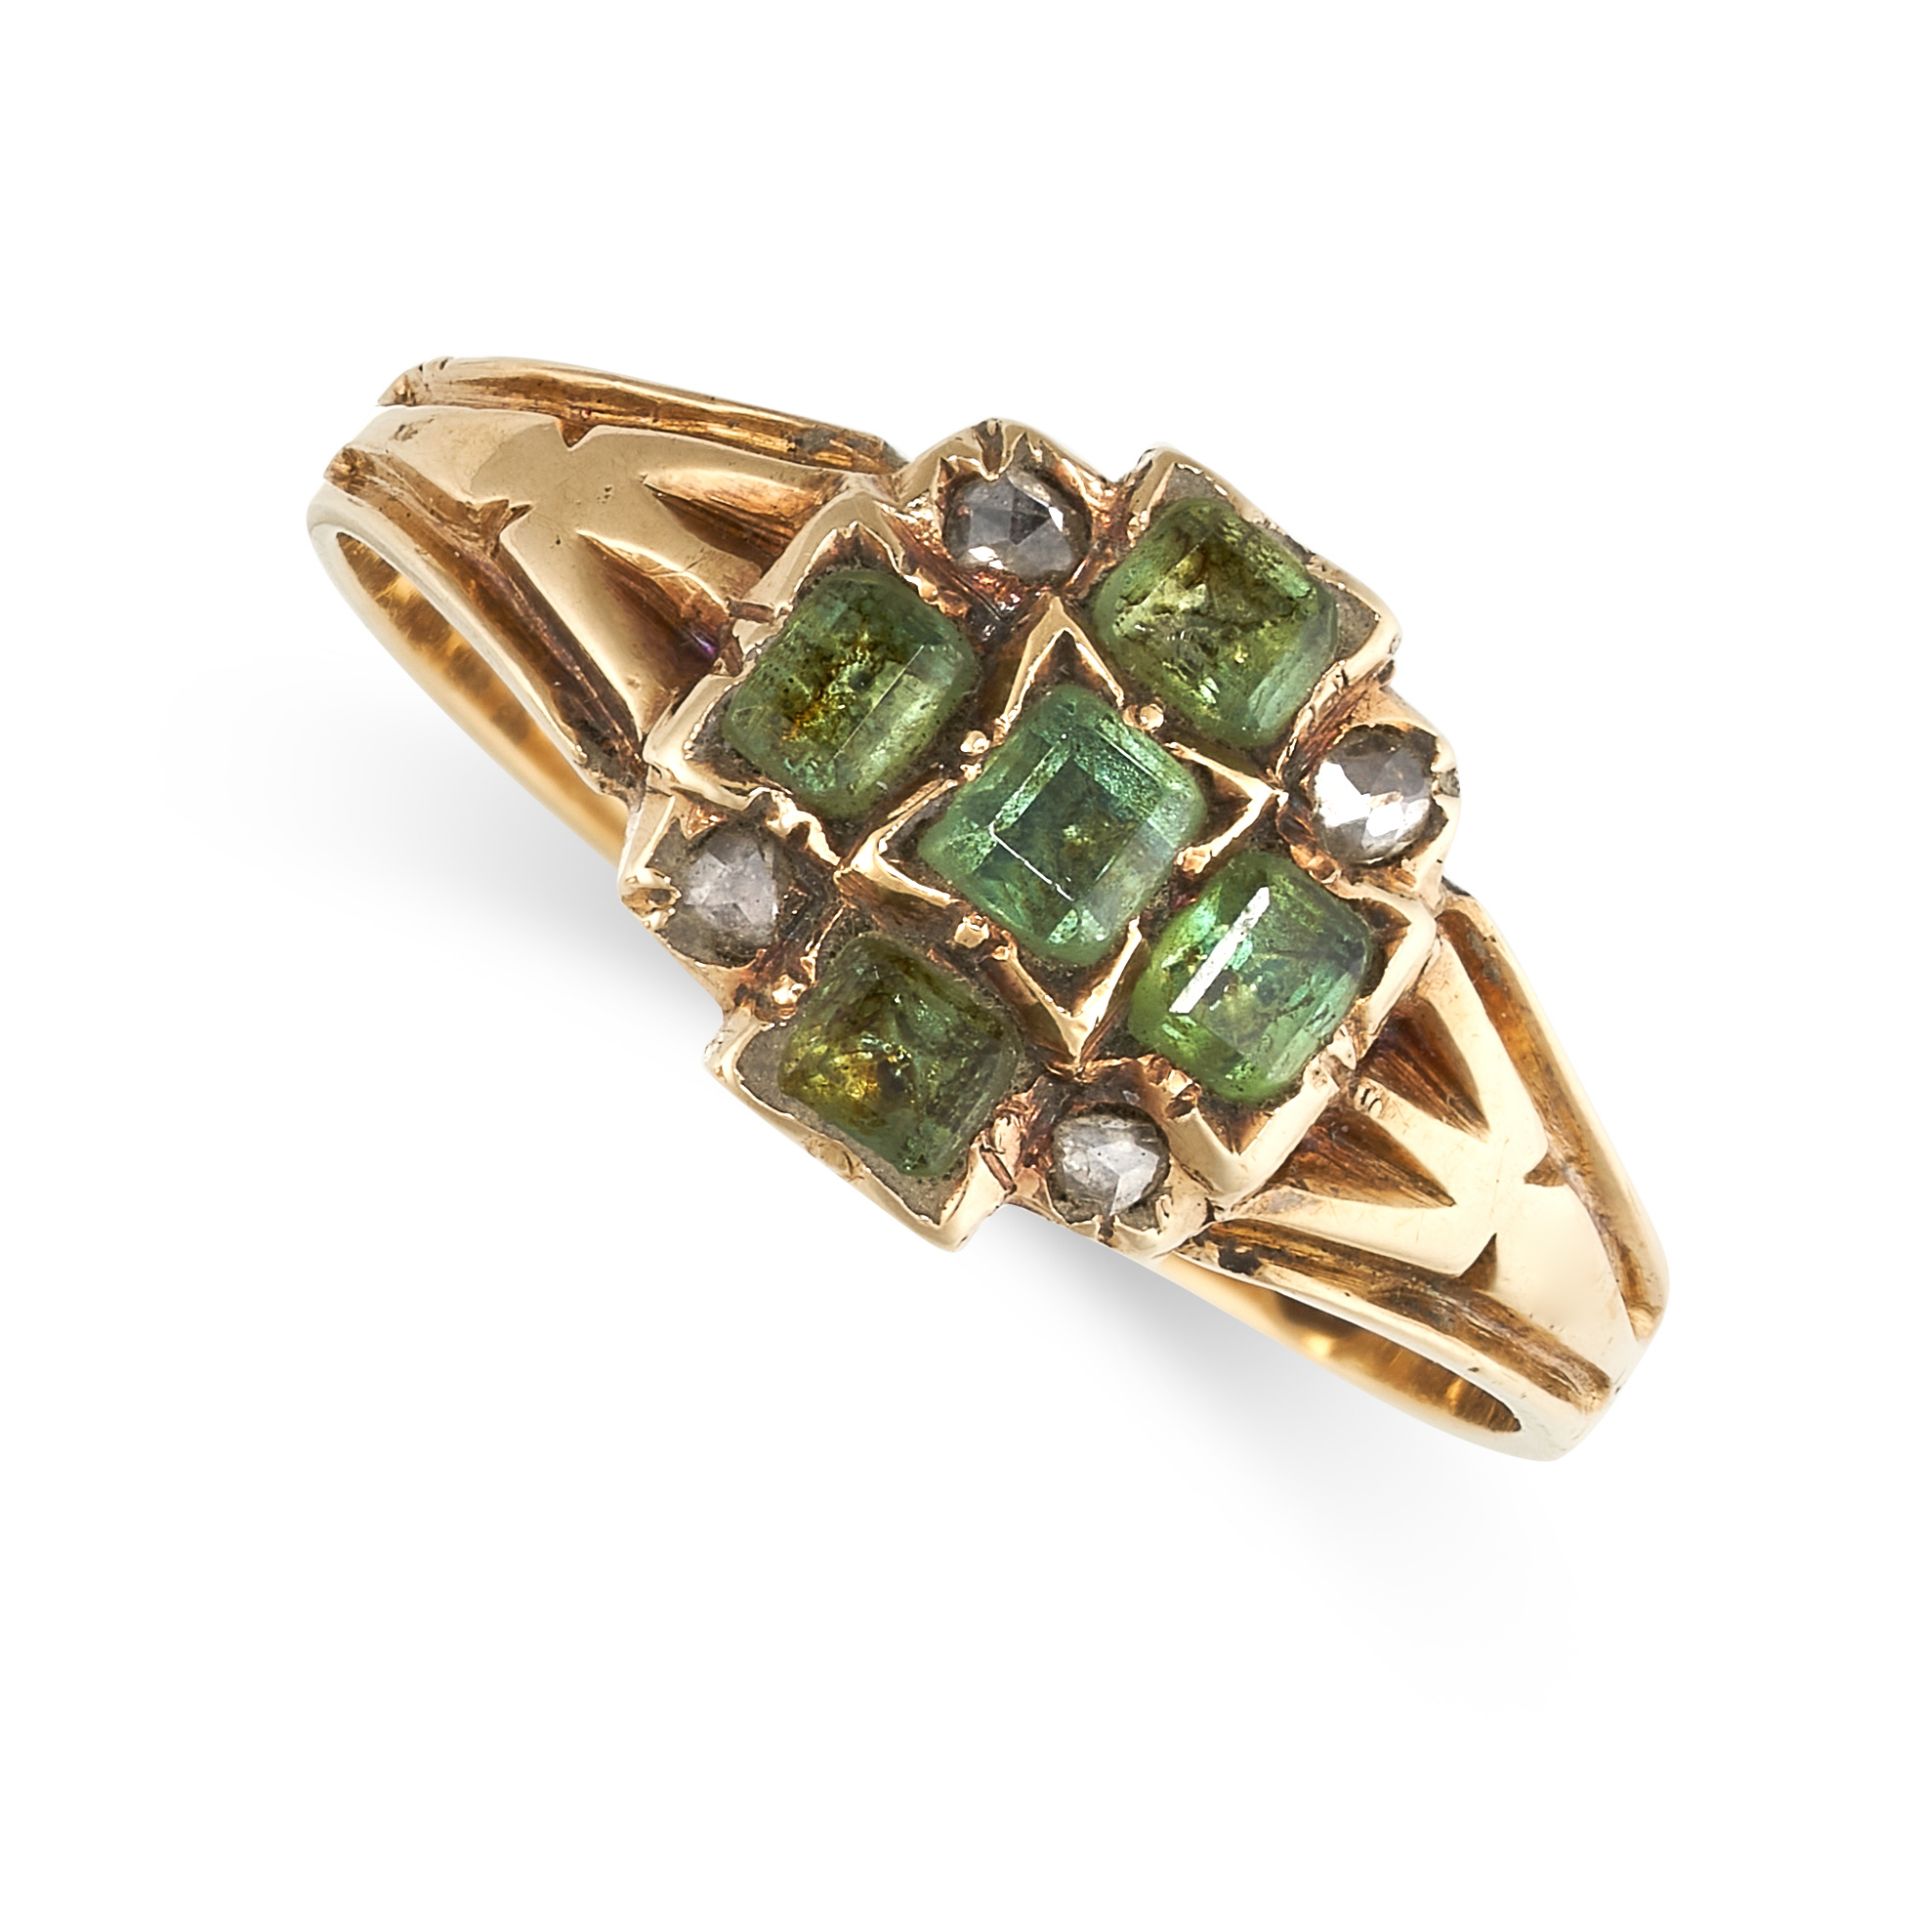 NO RESERVE - AN ANTIQUE VICTORIAN EMERALD AND DIAMOND RING, 1868 in 18ct yellow gold, the face set